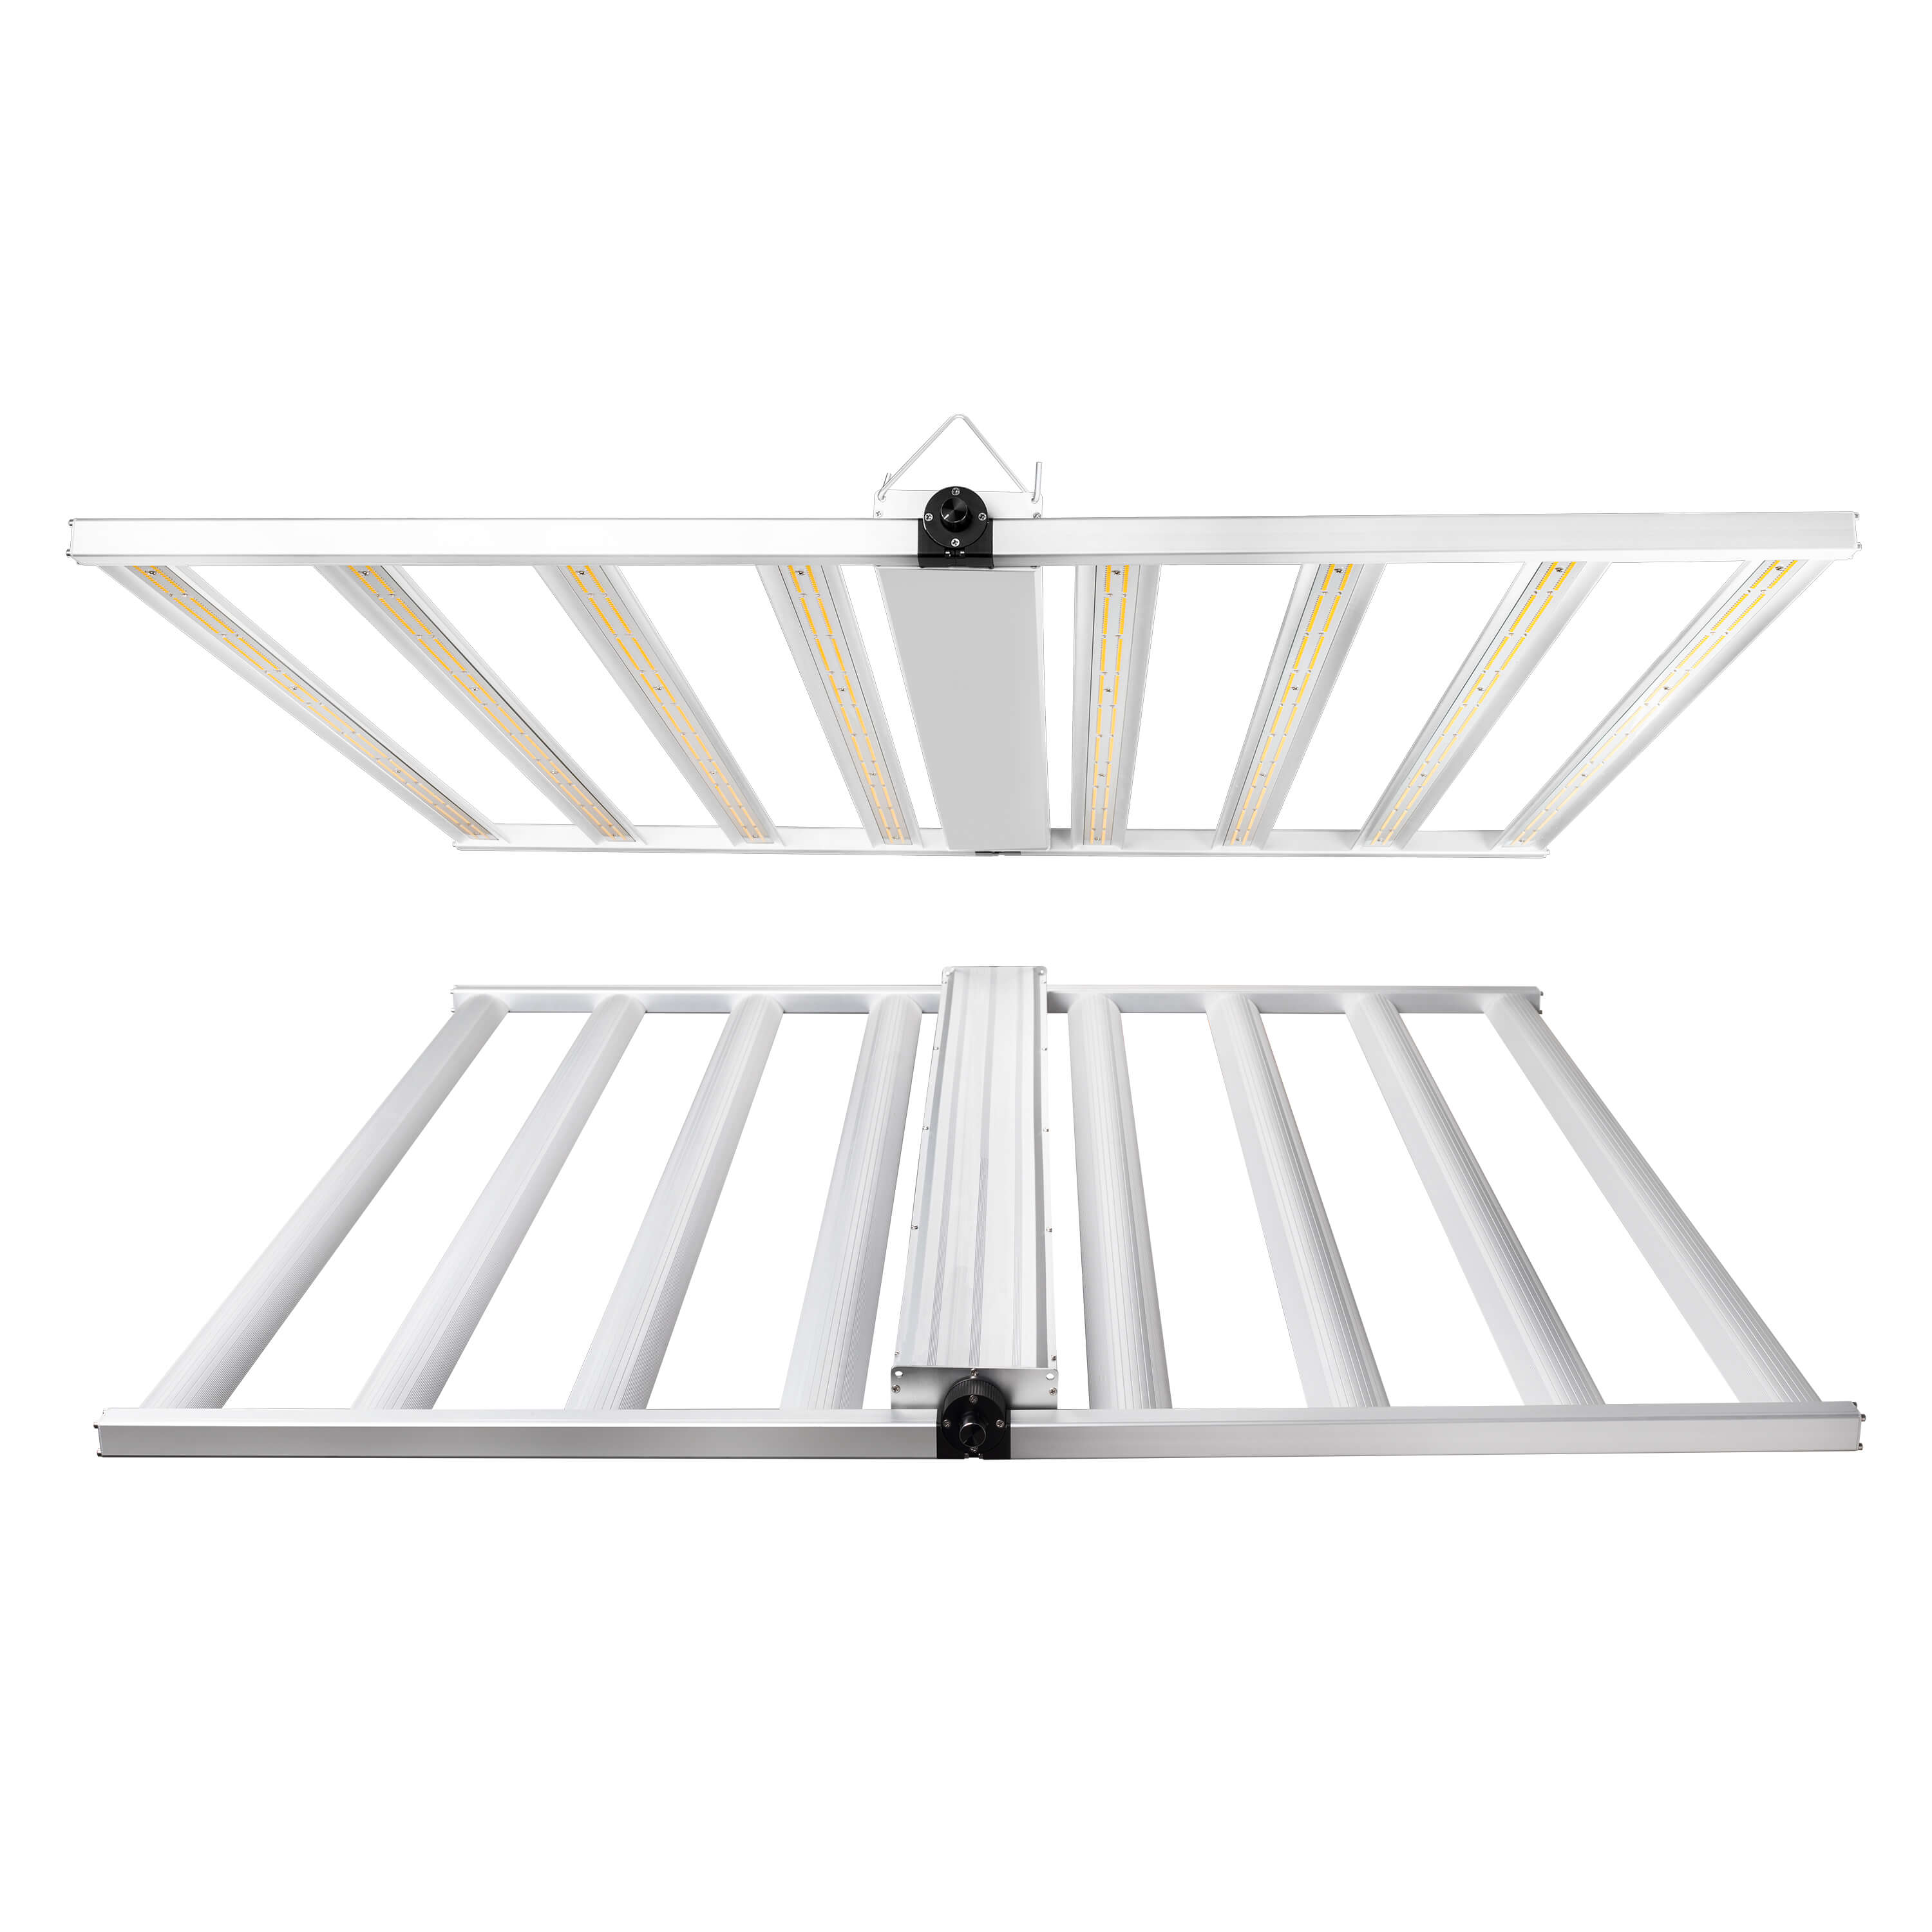 CT-720 Full Spectrum LED Grow Light - 720 Watts, 5'x5'/6'x6', Dimmable, High Efficacy, Commercial Use | Cultiuana-2